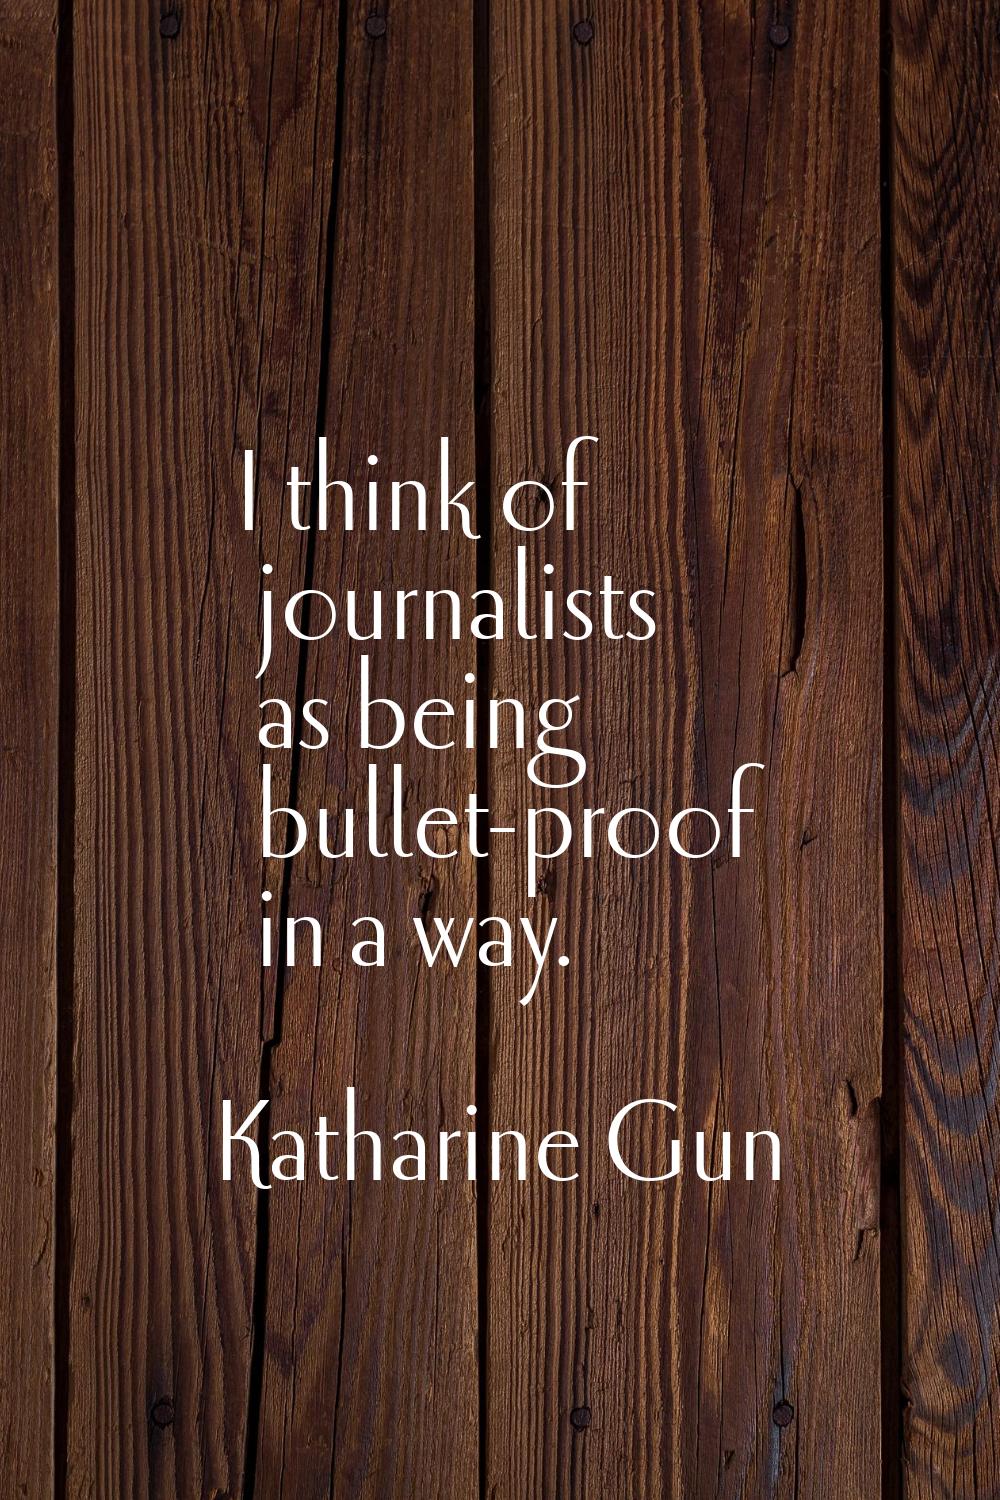 I think of journalists as being bullet-proof in a way.